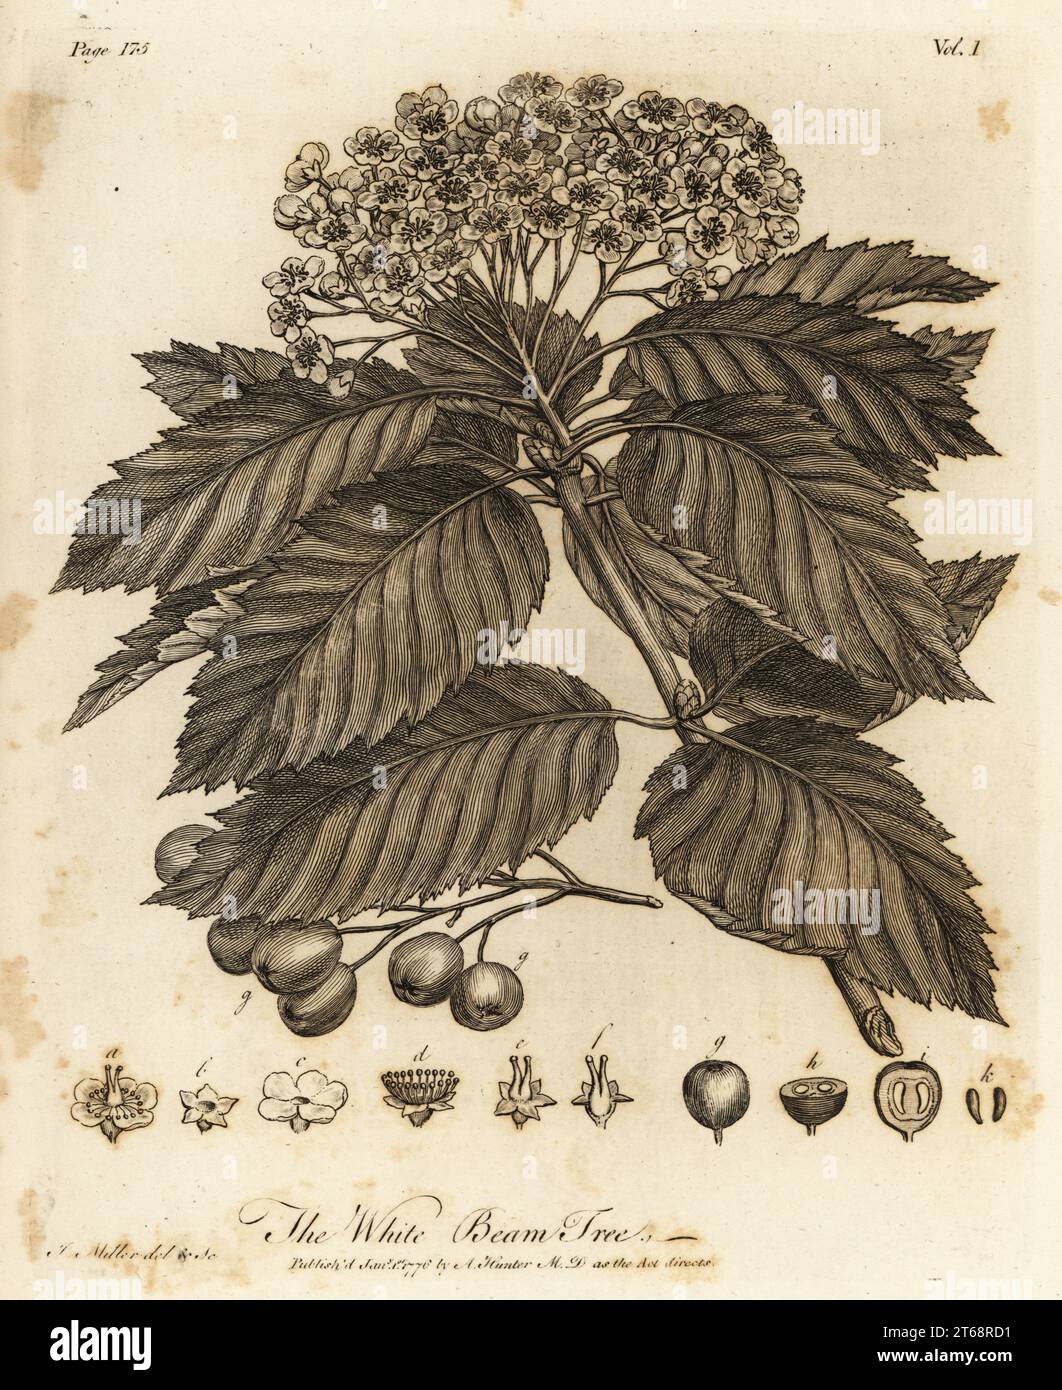 Whitebeam, Sorbus aria. White Beam Tree., Crataegus aria. Copperplate engraving drawn and engraved by John Miller (Johann Sebastian Muller) from John Evelyns Sylva, or A Discourse of Forest Trees and the Propagation of Timer, J. Dodsley, London, 1776. Stock Photo